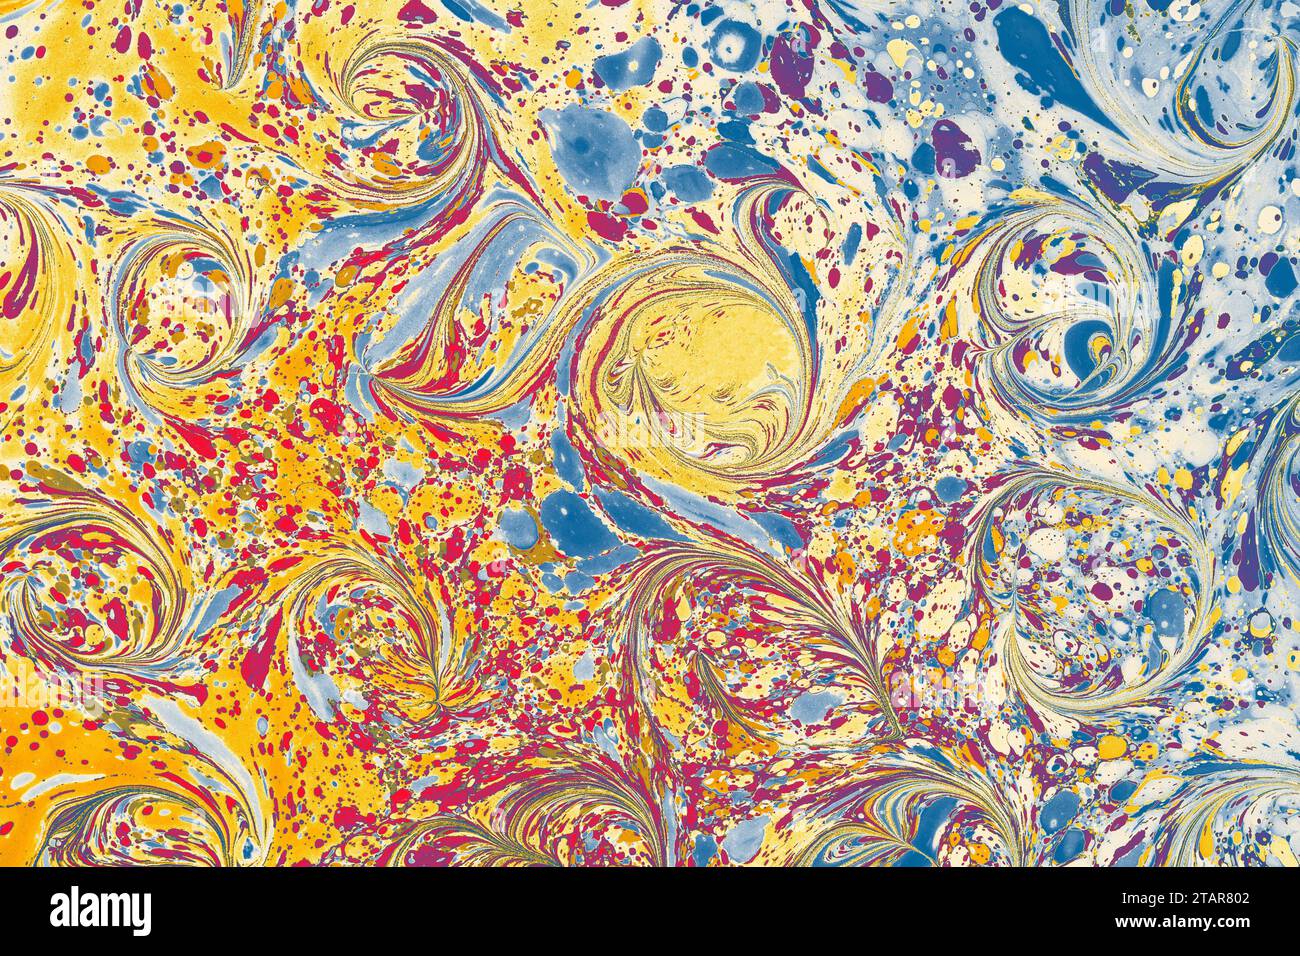 Abstract creative marbling pattern templat for fabric, design background texture Stock Photo